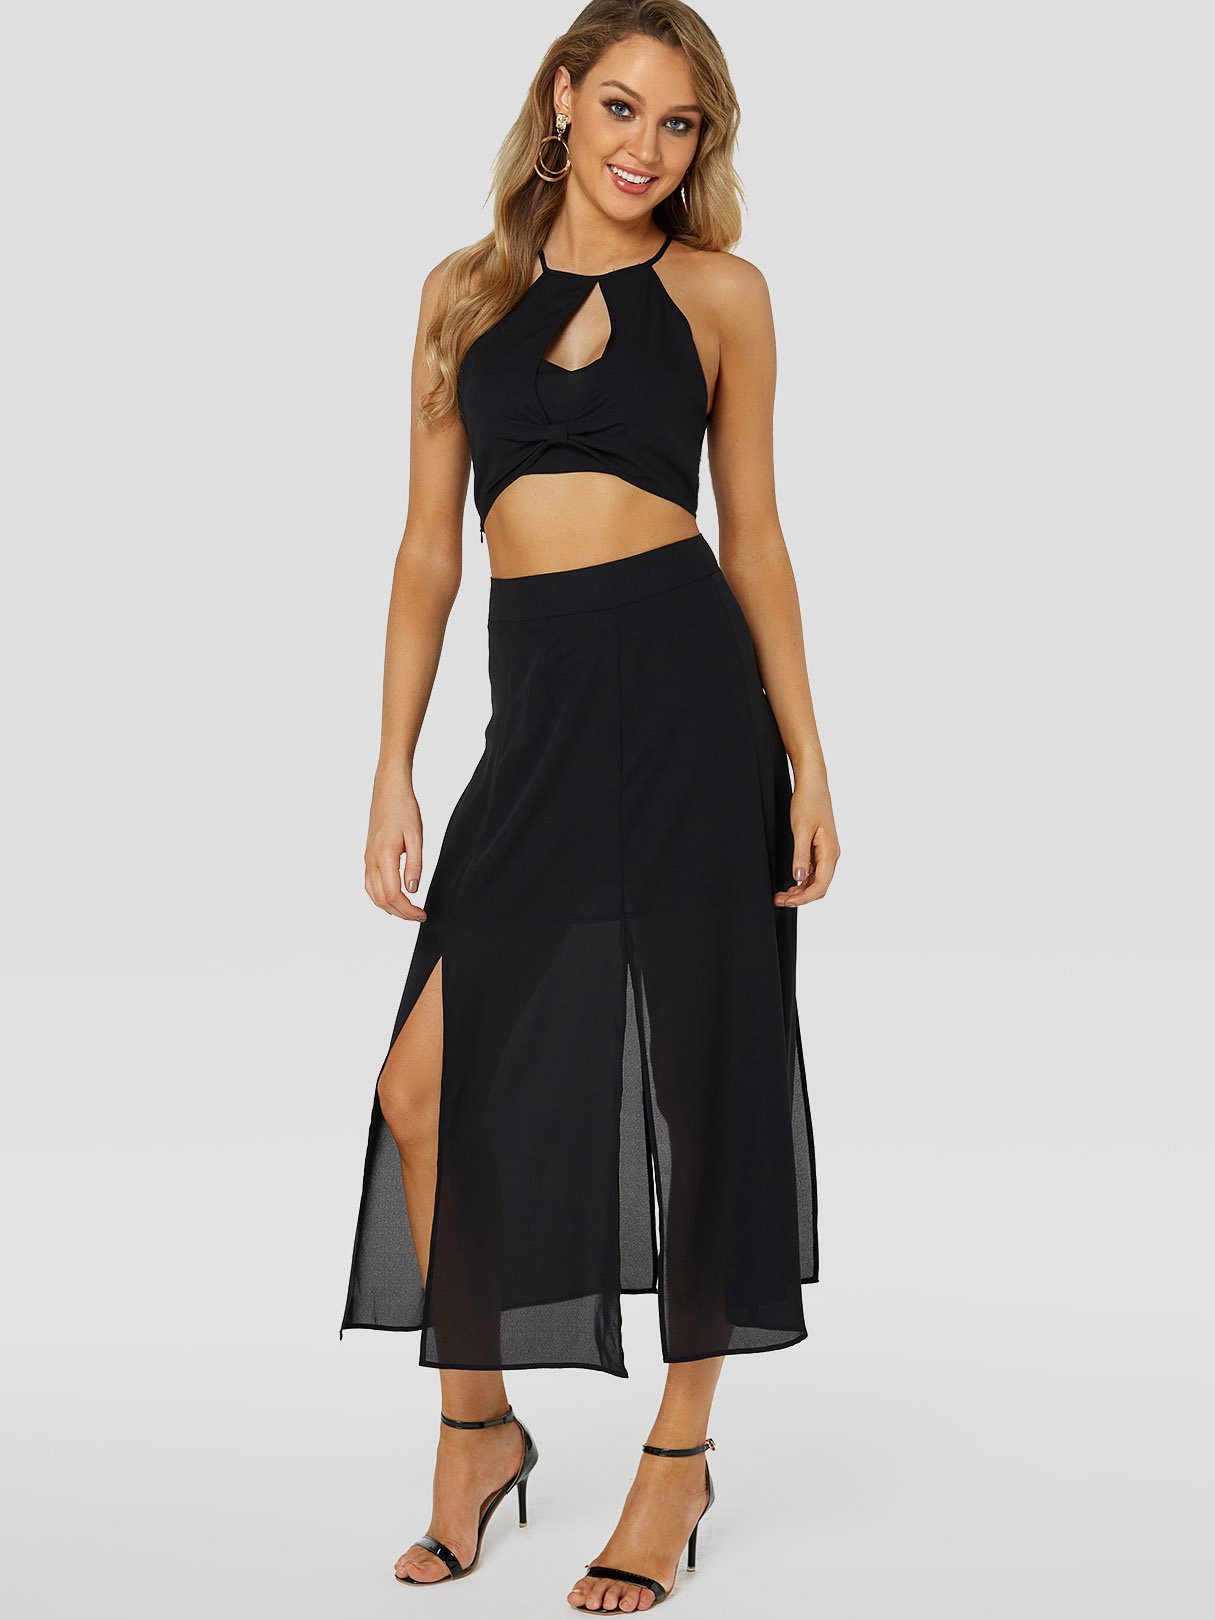 NEW FEELING Womens Black Two Piece Outfits